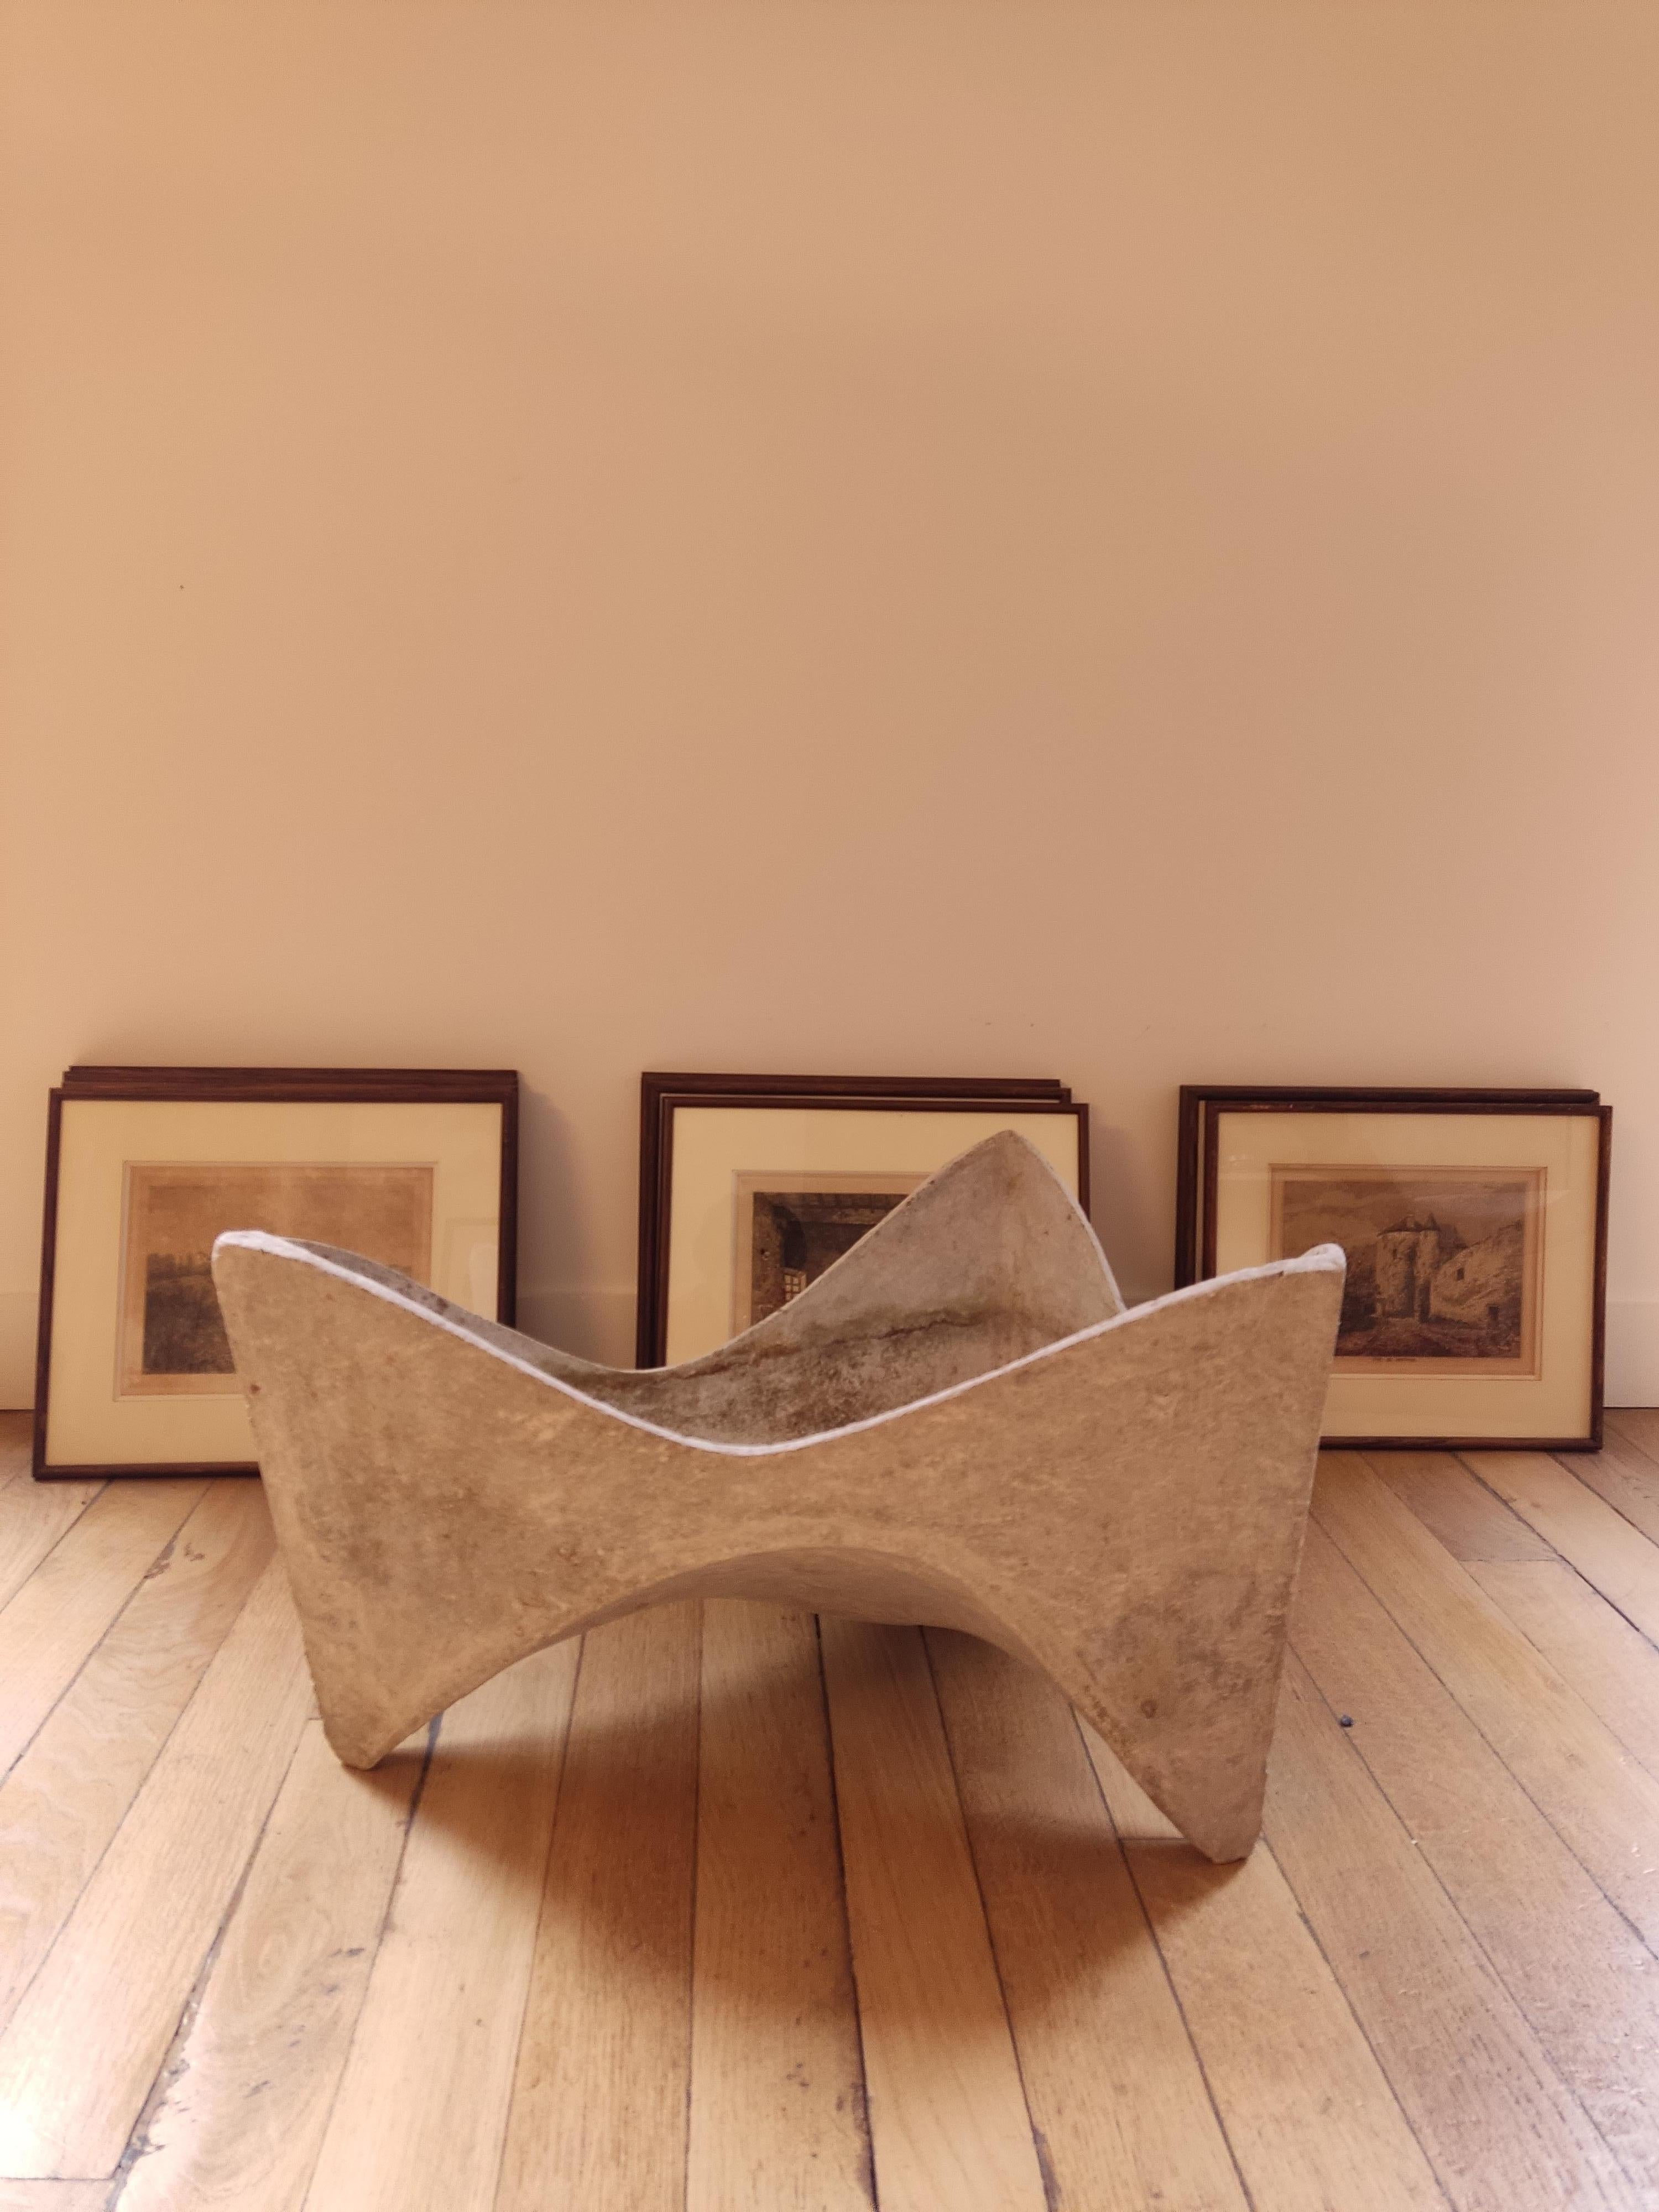 Willy GUHL (1915-2004)
JARDINIERE sculpture, fiber cement proof marked in hollow 13 6 68 and 73.
A rare style, midcentury Willy Guhl abstract triangular sculptural planter. This planter was designed by Swiss neo-functionalist designer Willy Guhl